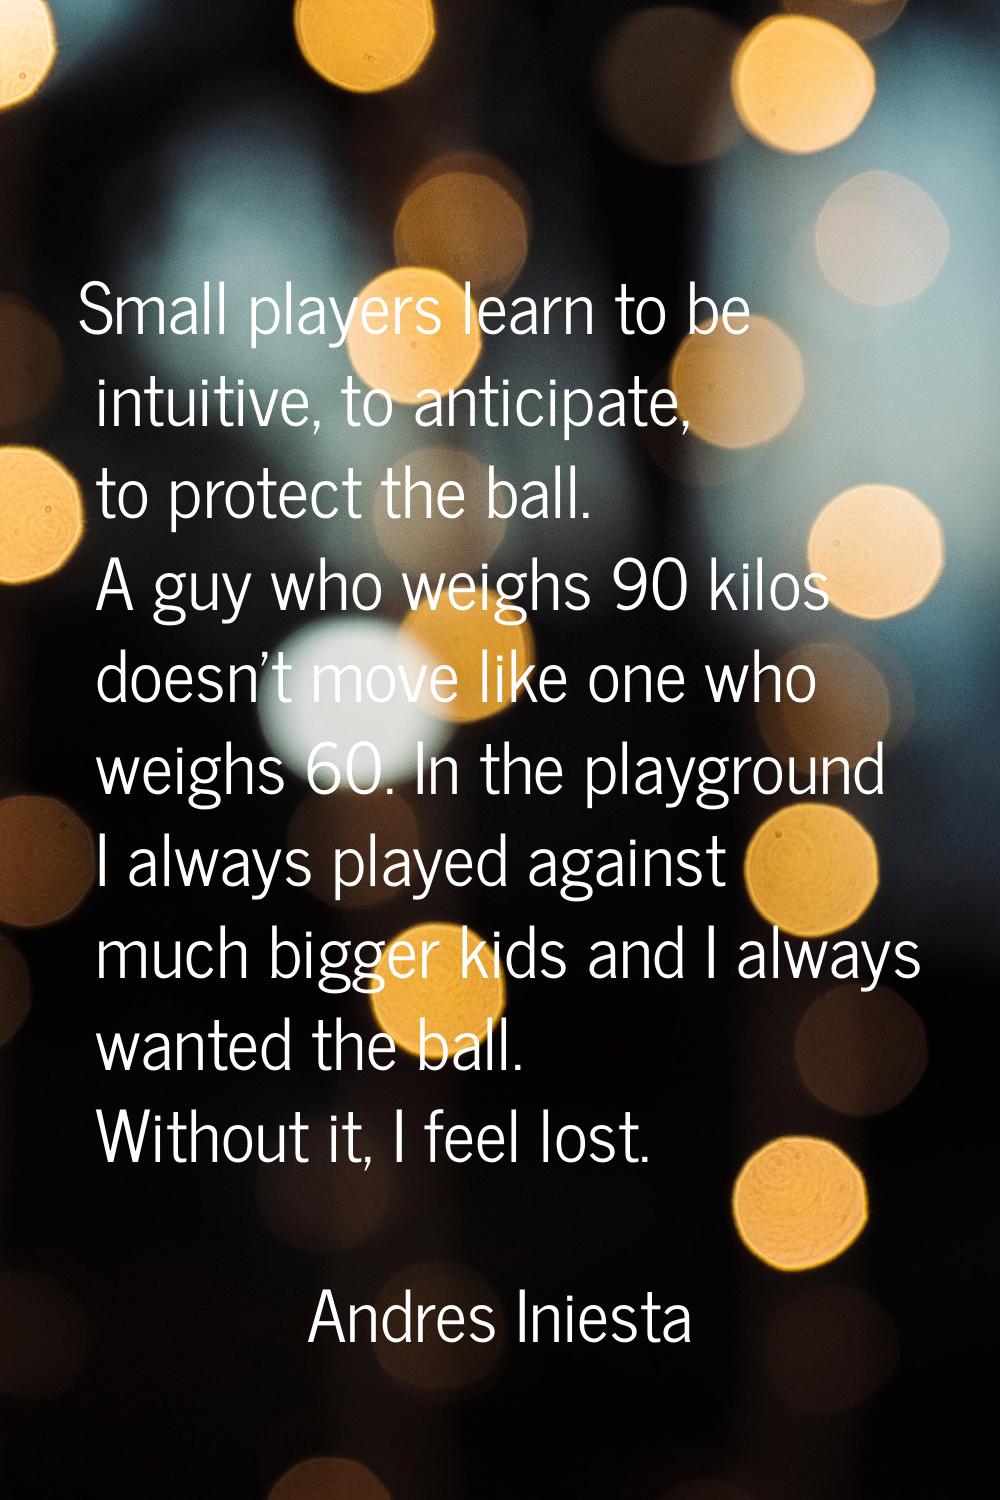 Small players learn to be intuitive, to anticipate, to protect the ball. A guy who weighs 90 kilos 